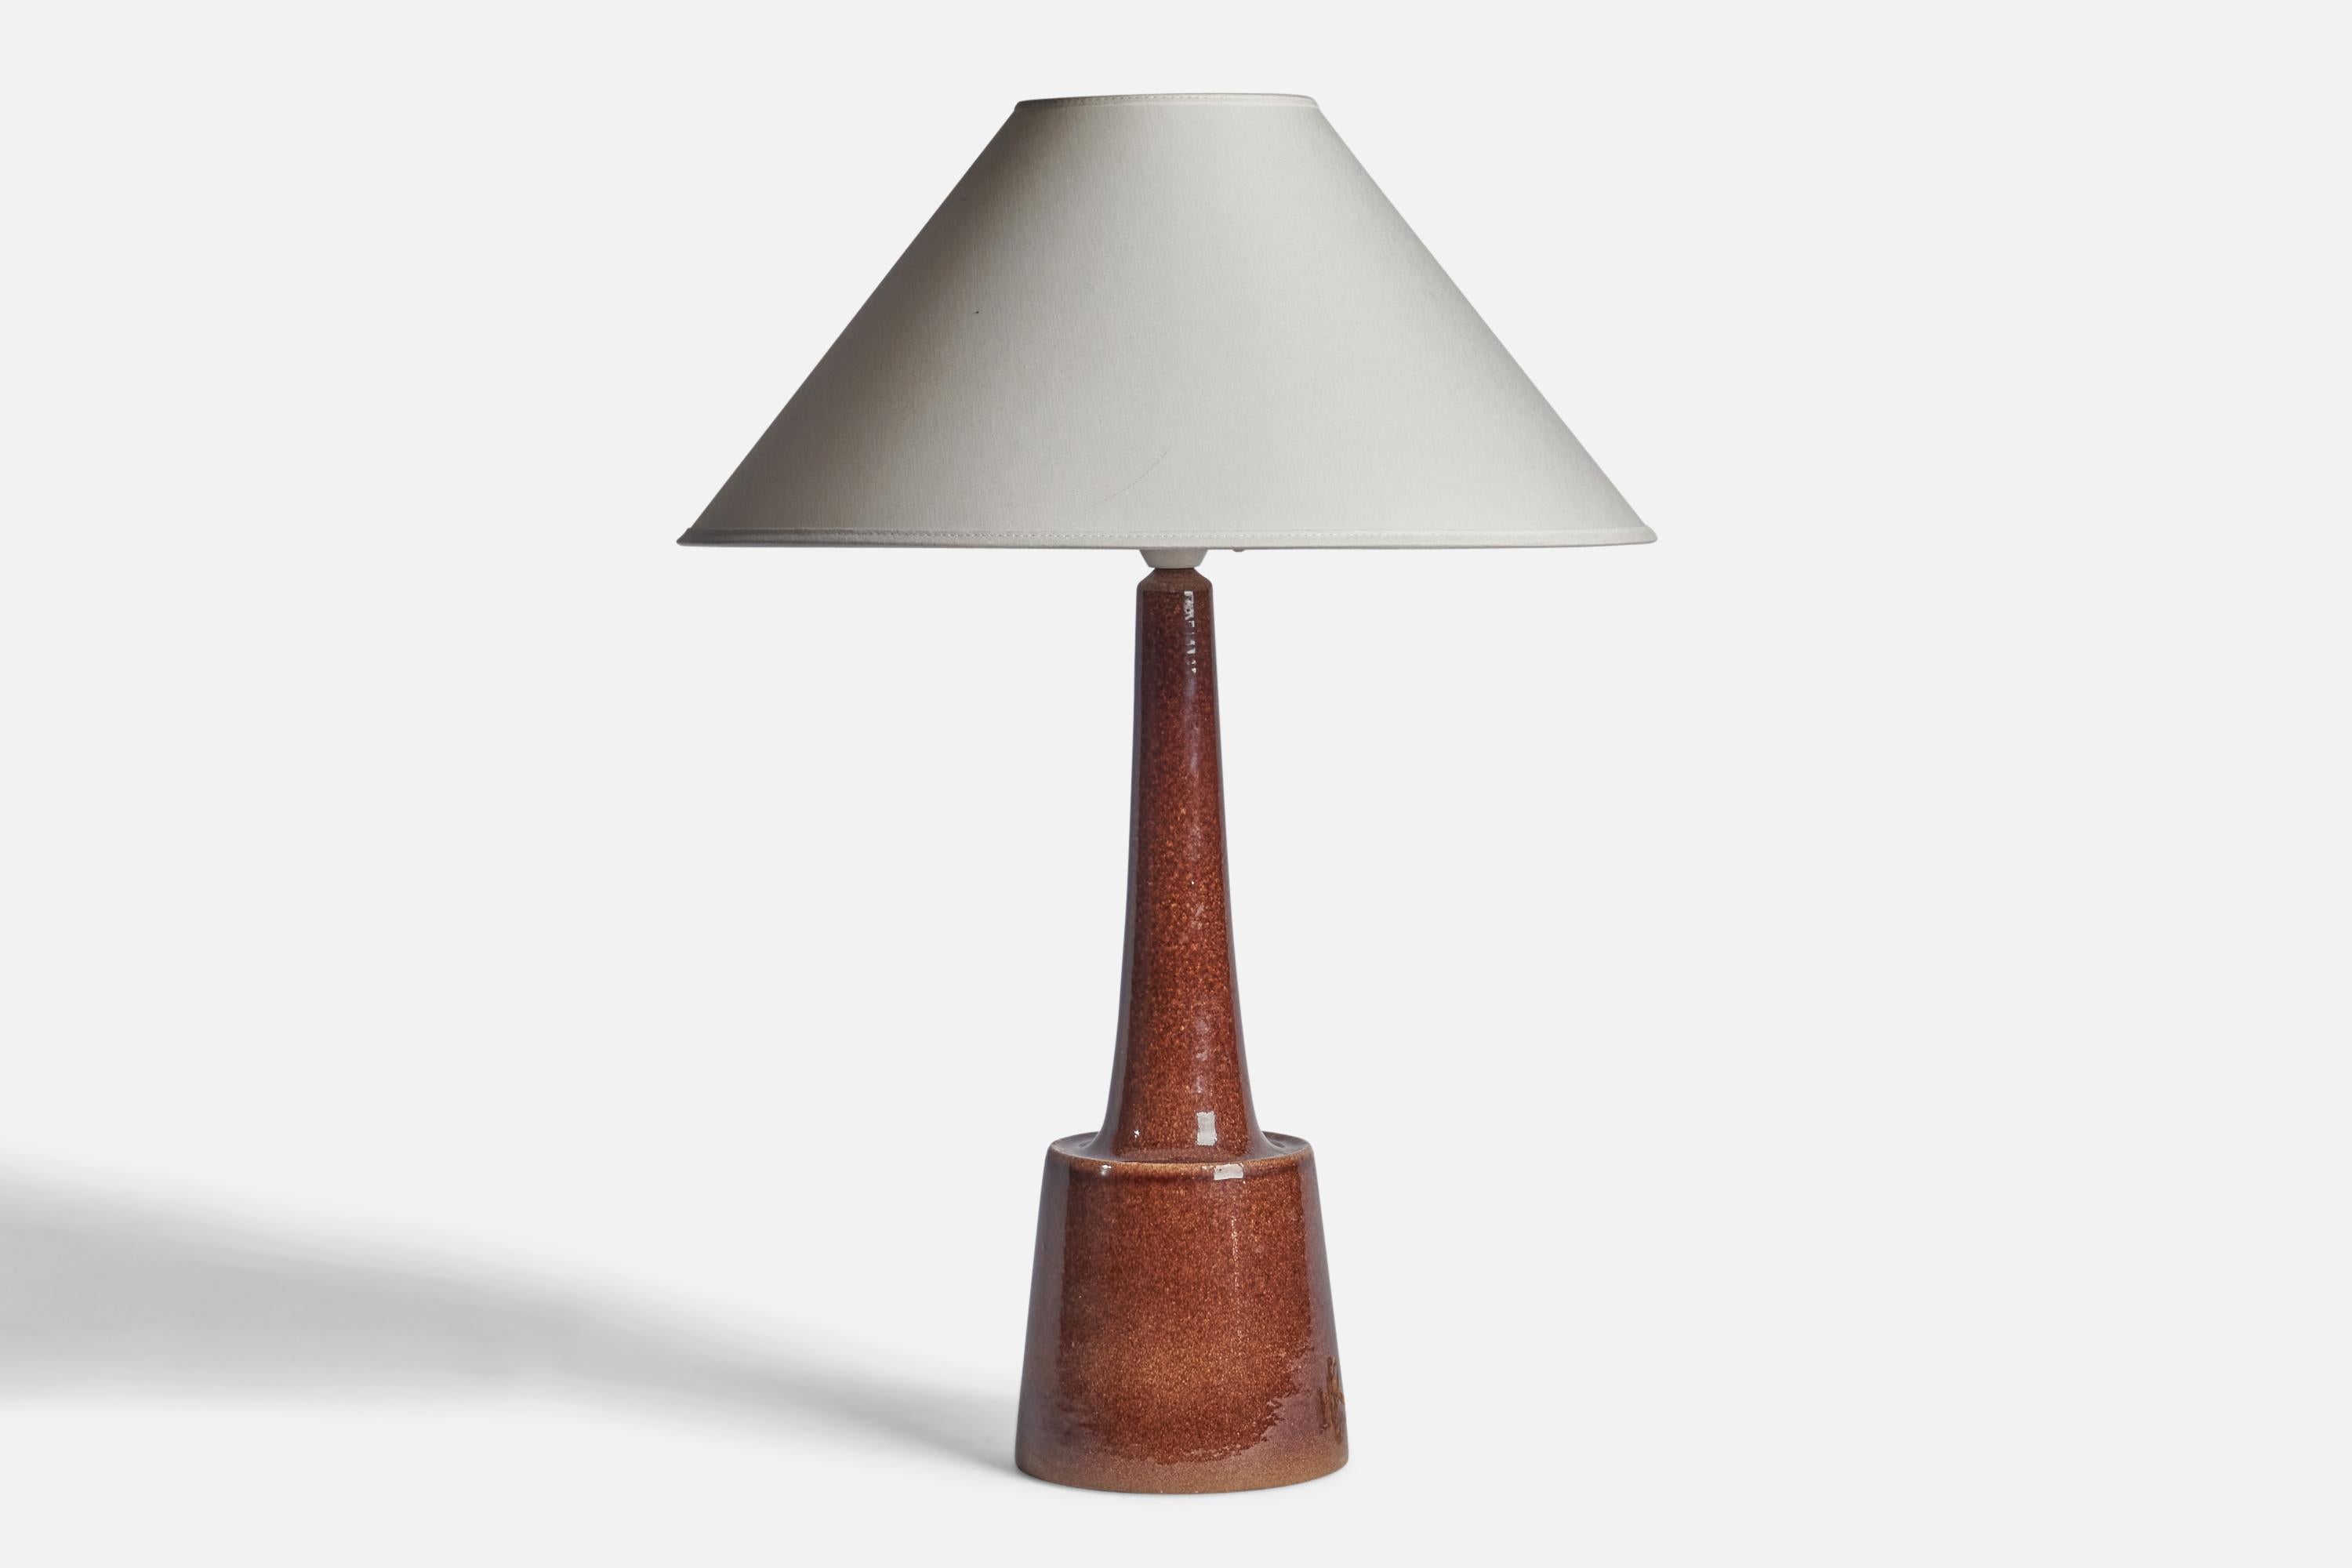 A brown-glazed stoneware table lamp designed by Per & Annelise Linneman-Schmidt and produced by Palshus, Denmark, 1960s

Dimensions of Lamp (inches): 17.65 H x 5.45” Diameter
Dimensions of Shade (inches): 4.5” Top Diameter x 16” Bottom Diameter x